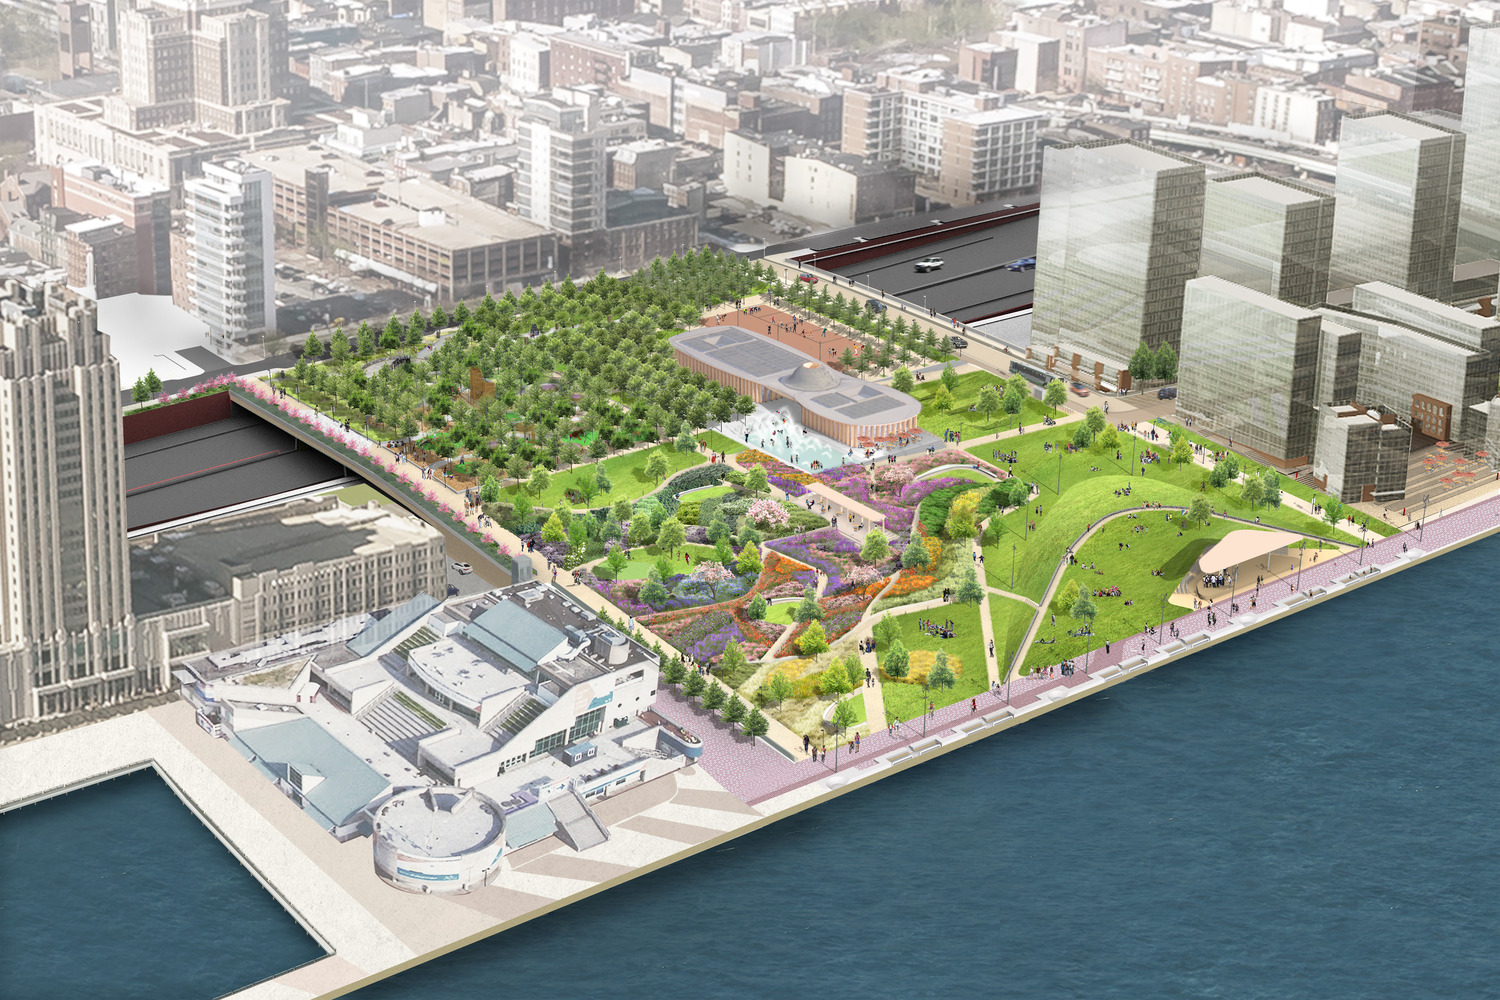 <p>The new Park at Penn's Landing will be a 11.5-acre civic space connecting the city back to  the waterfront. Amenities will include the central pavilion and café, flexible open space for performances and festivals; food and drink options; a new play area; a relocated ice rink for skating in the winter; and a water play area to cool off in the summer.  &nbsp;<br /><br><small>&copy; Hargreaves Jones</small></p>